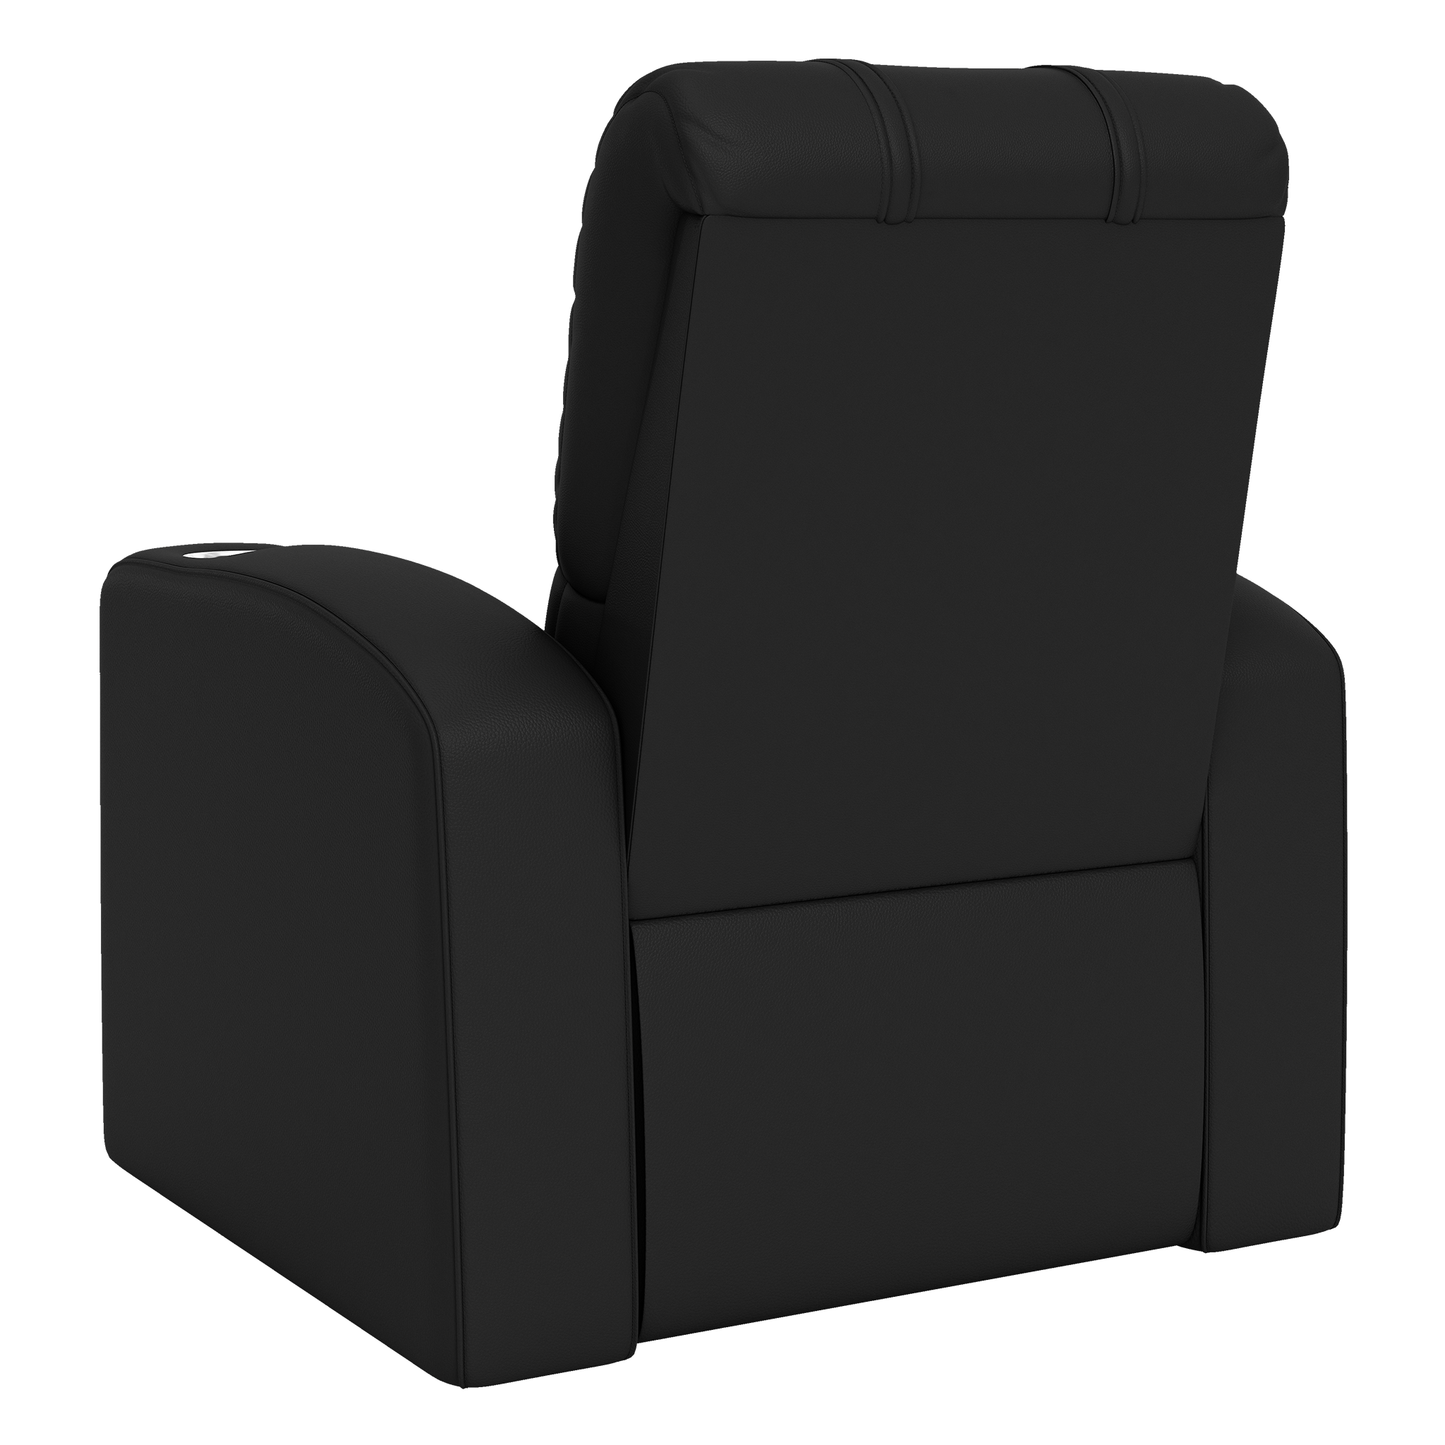 Relax Home Theater Recliner with Phoenix Suns Secondary